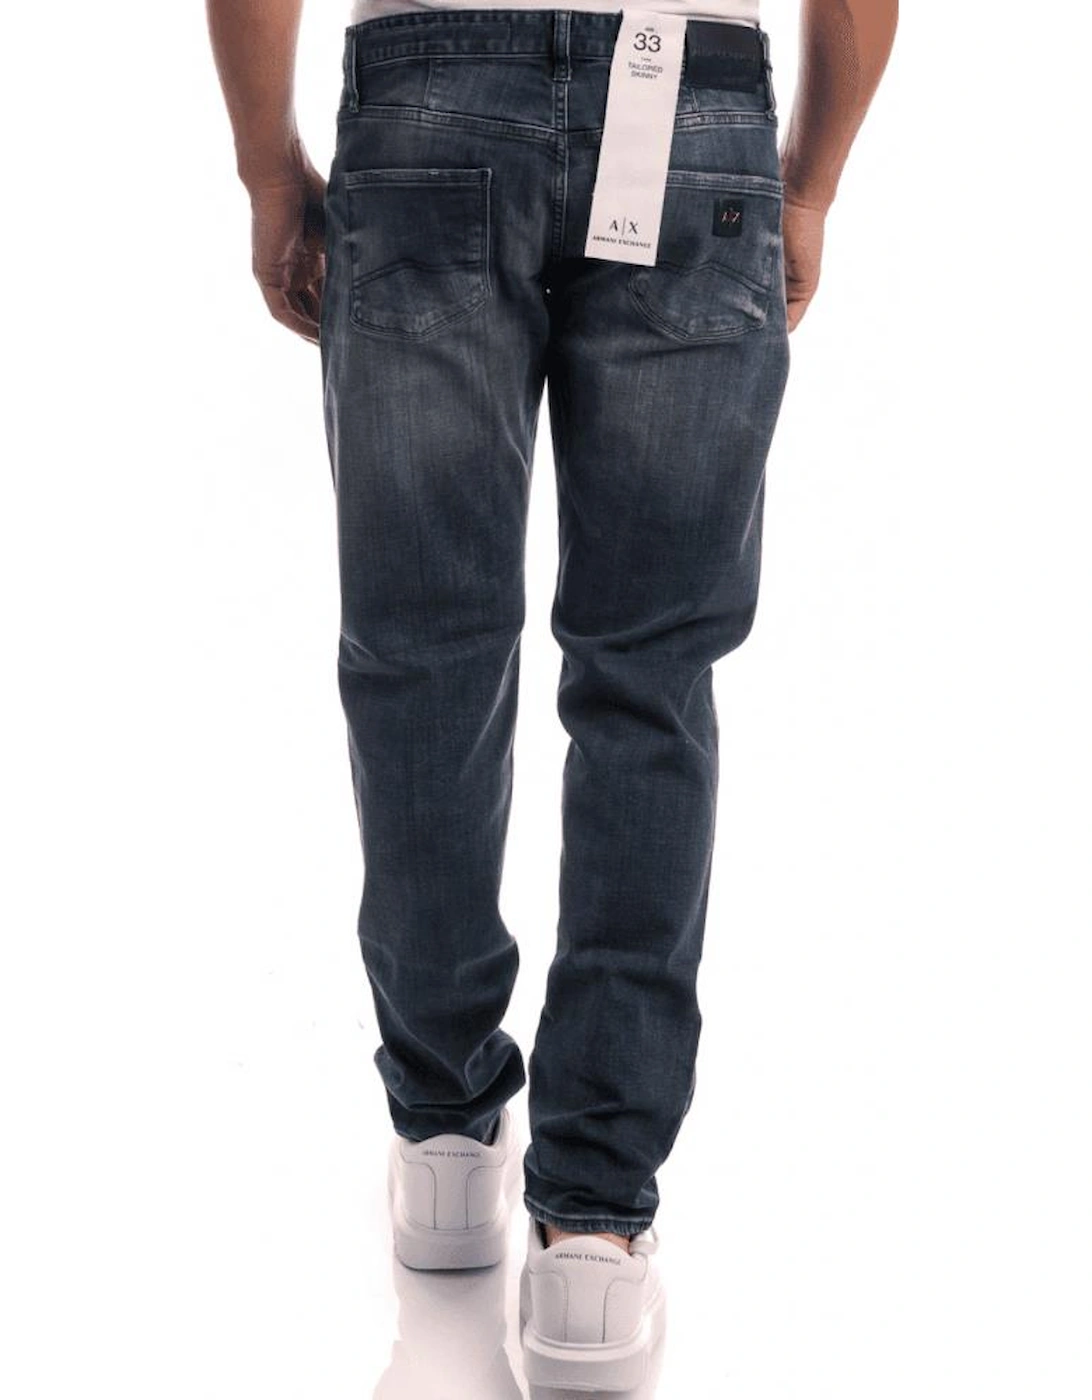 Cotton Tailored Skinny Fit Indigo Blue Jeans